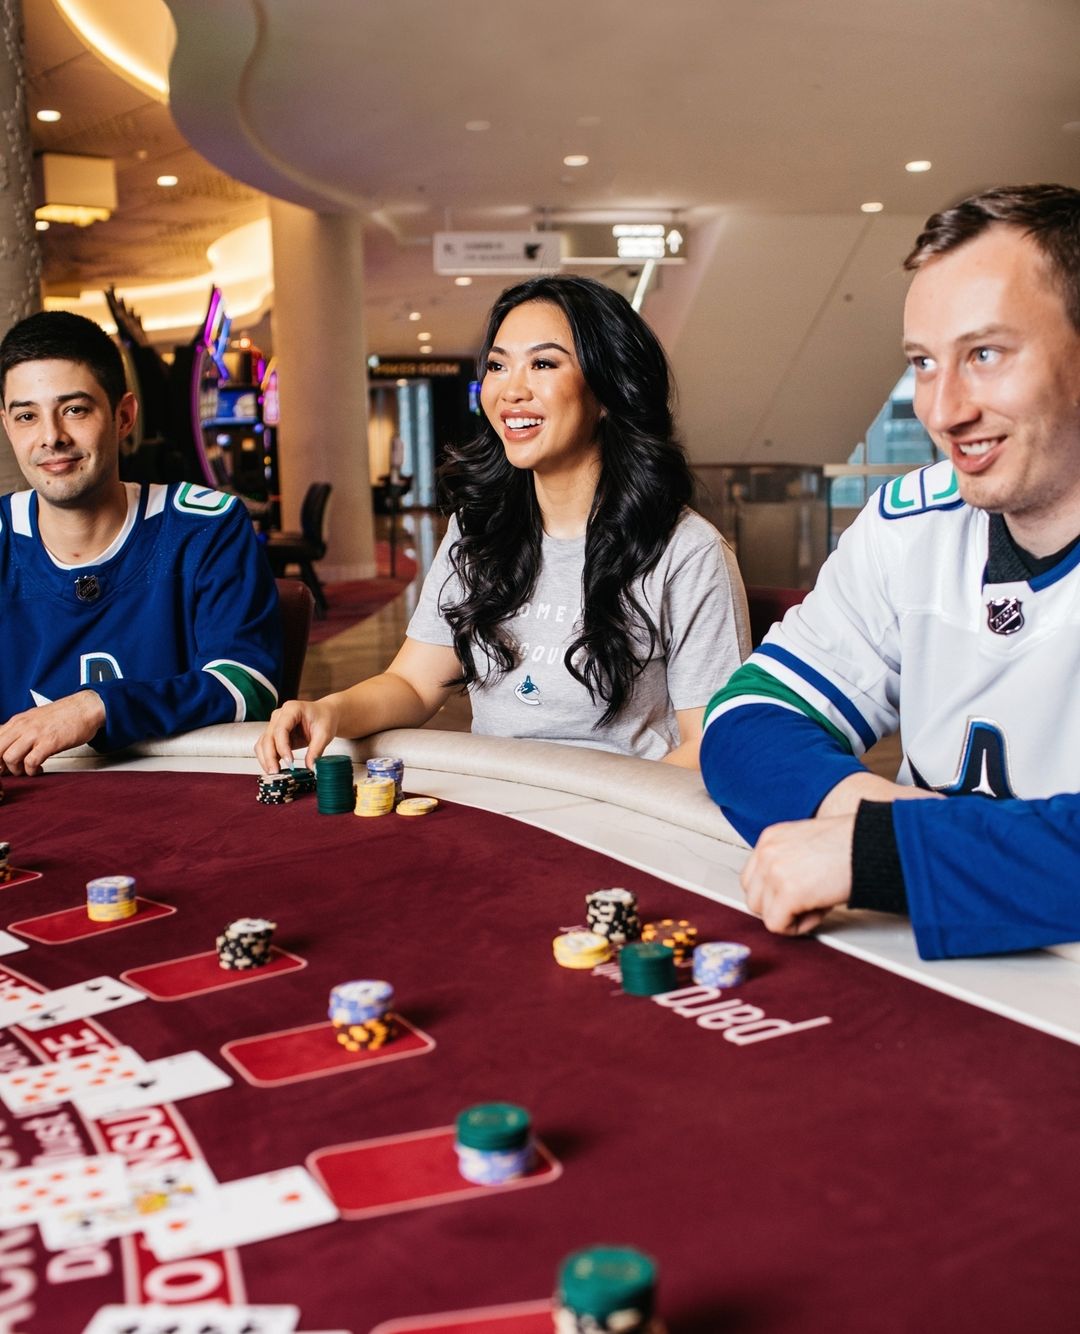 Parq Vancouver is the Official Casino Resort of the Vancouver Canucks